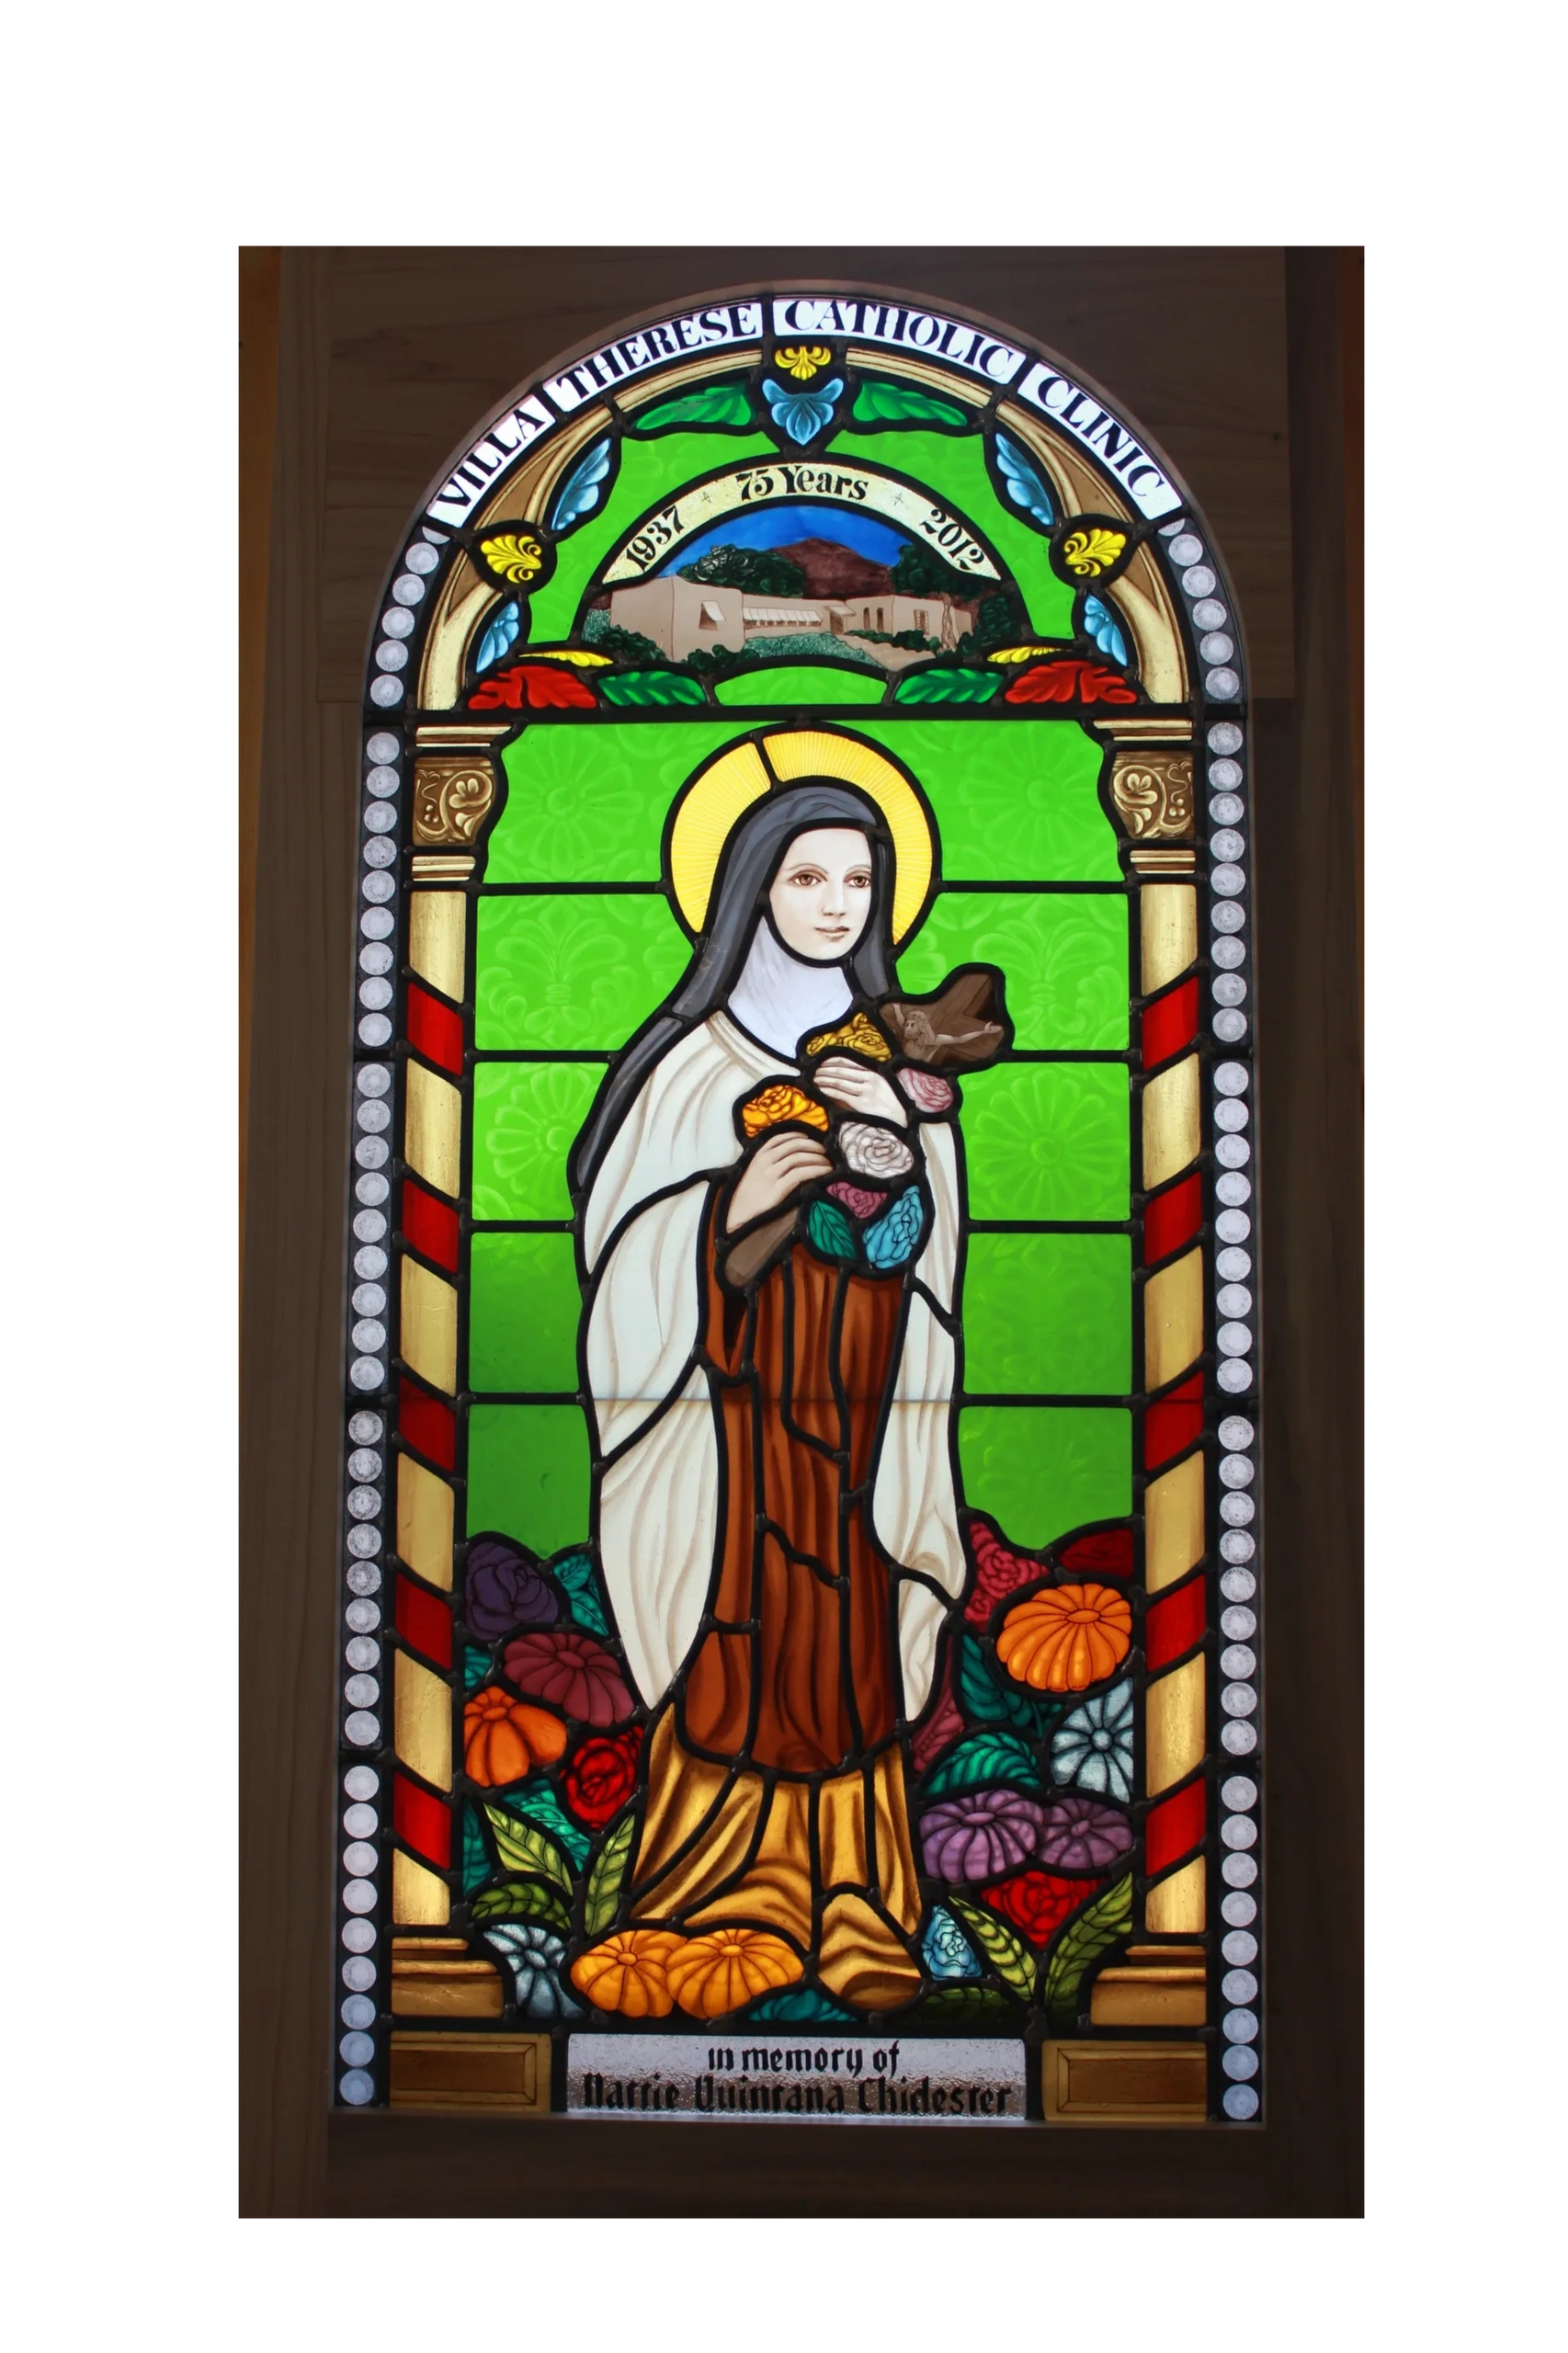 Stained glass window of St Therese holding flowers standing in a bed of colorful flowers